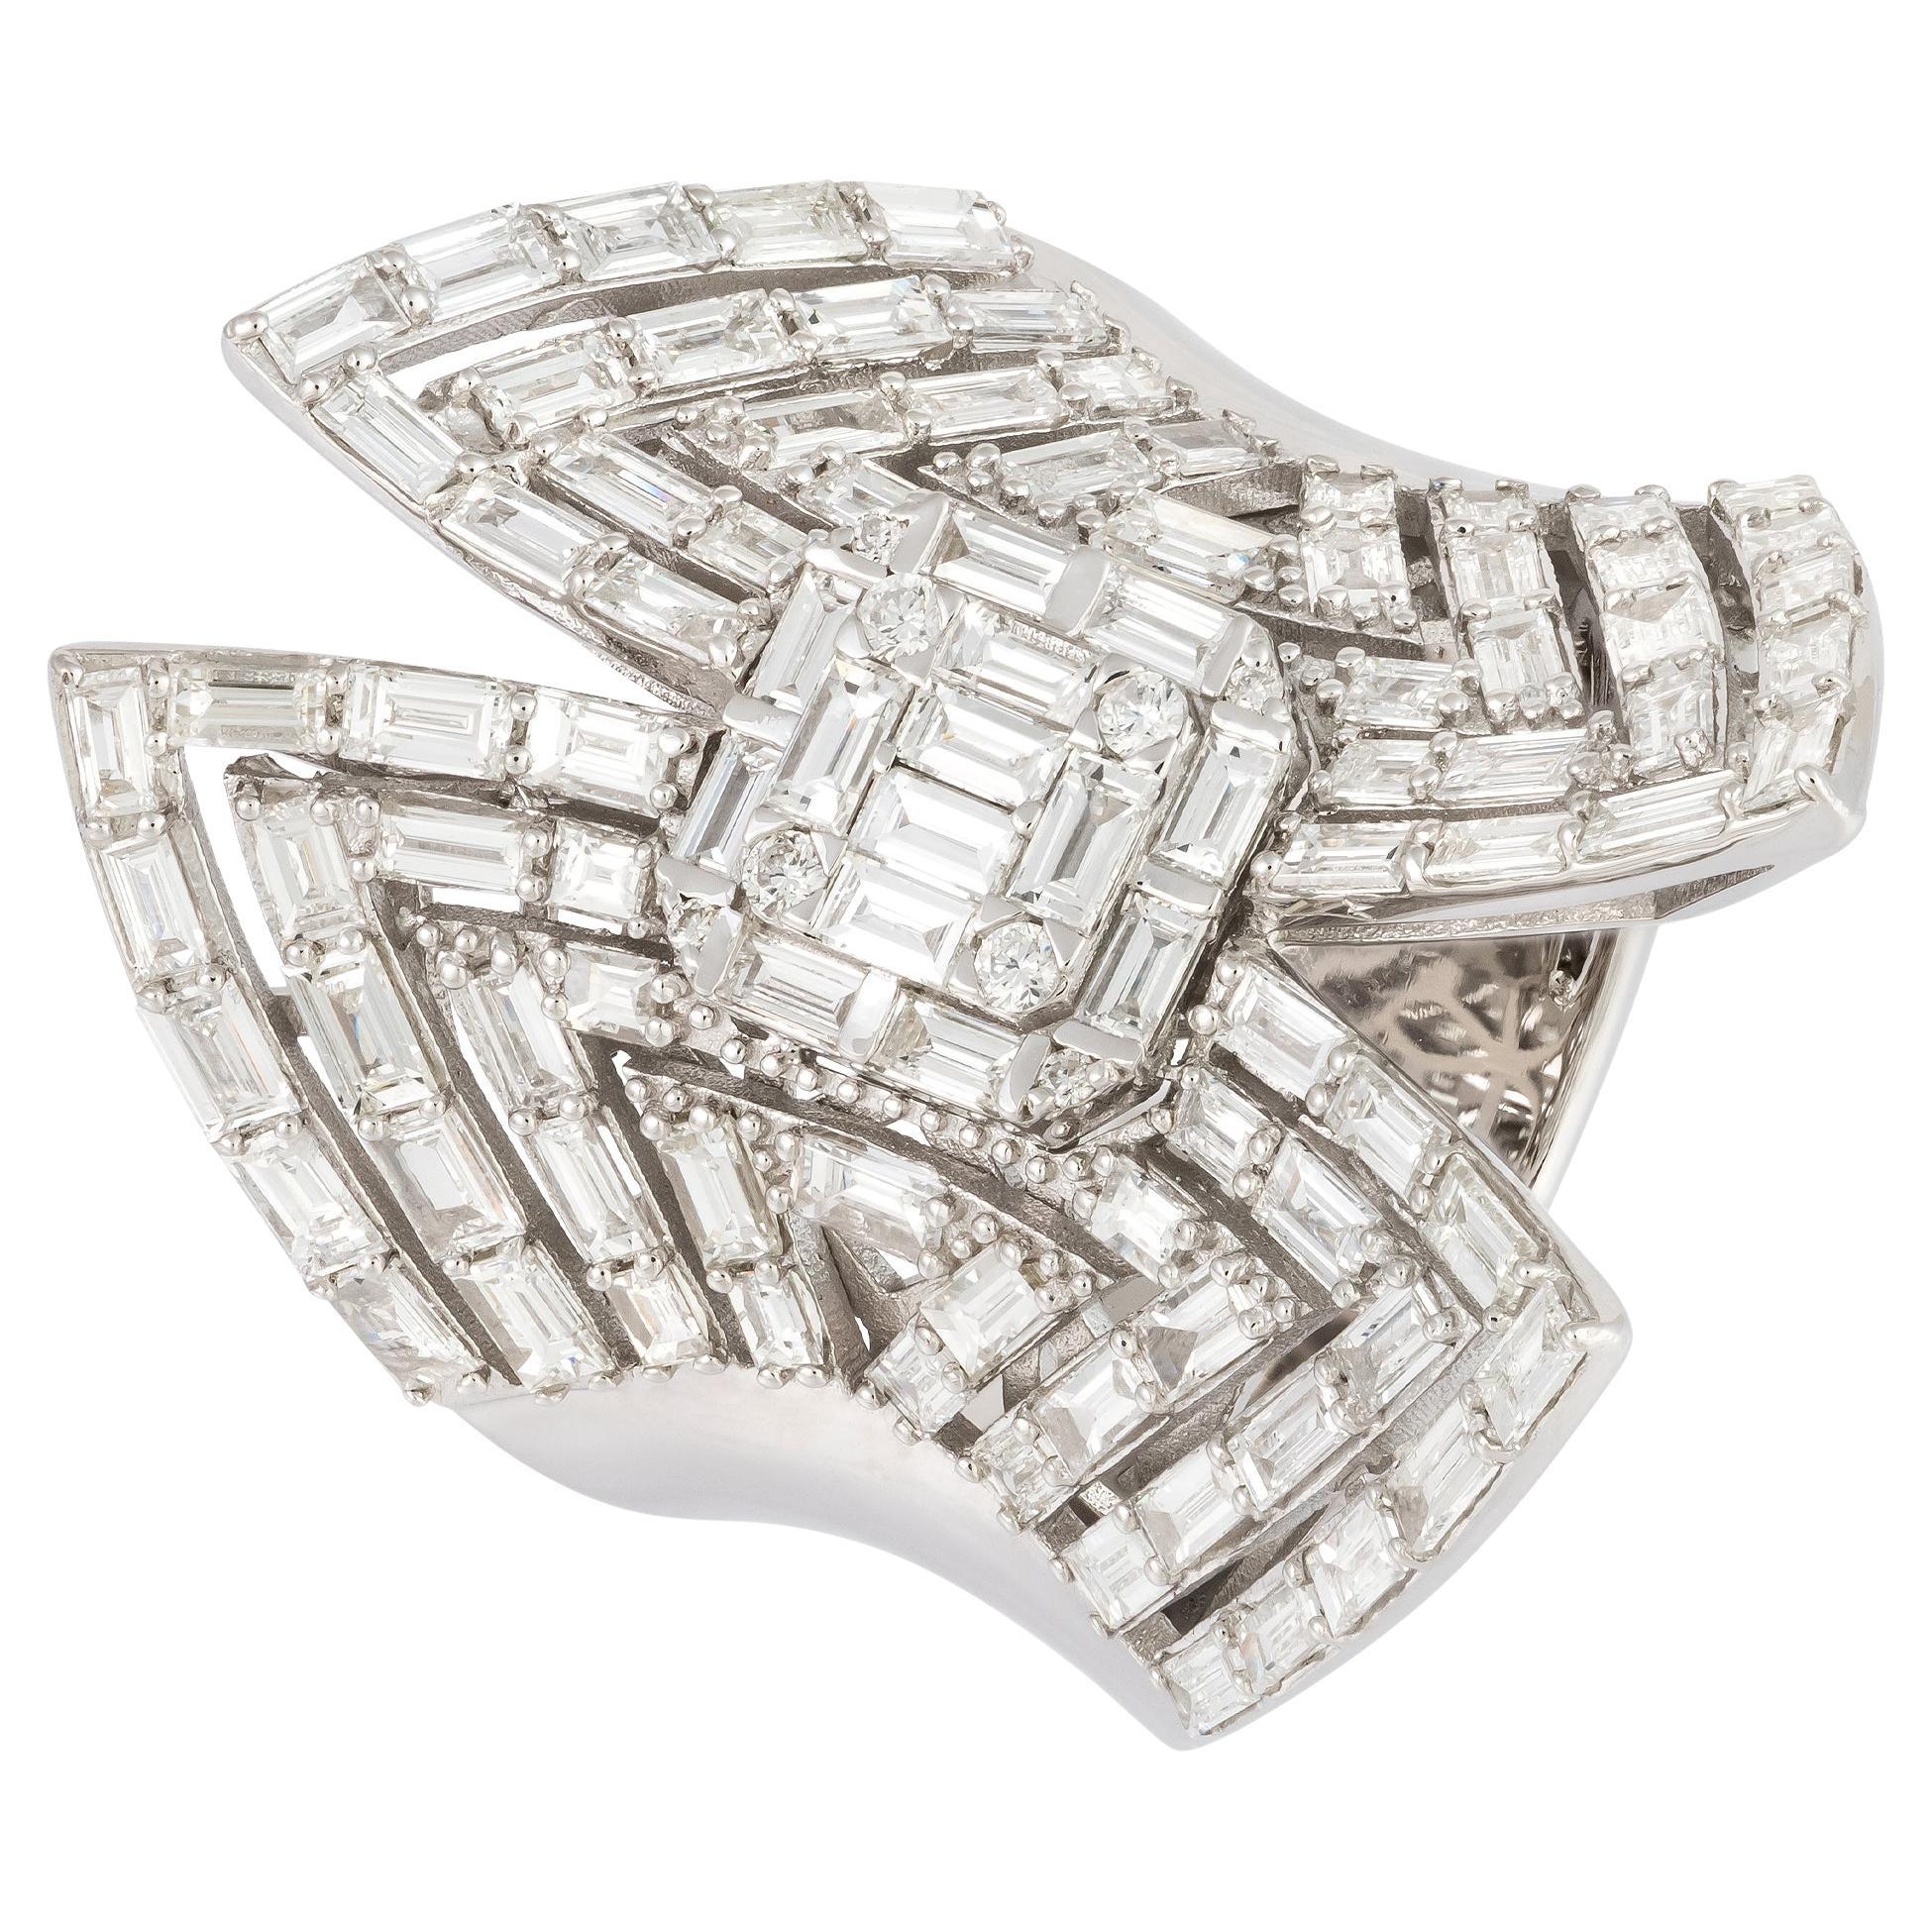 For Sale:  Statement  White 18K Gold White Diamond Ring For Her